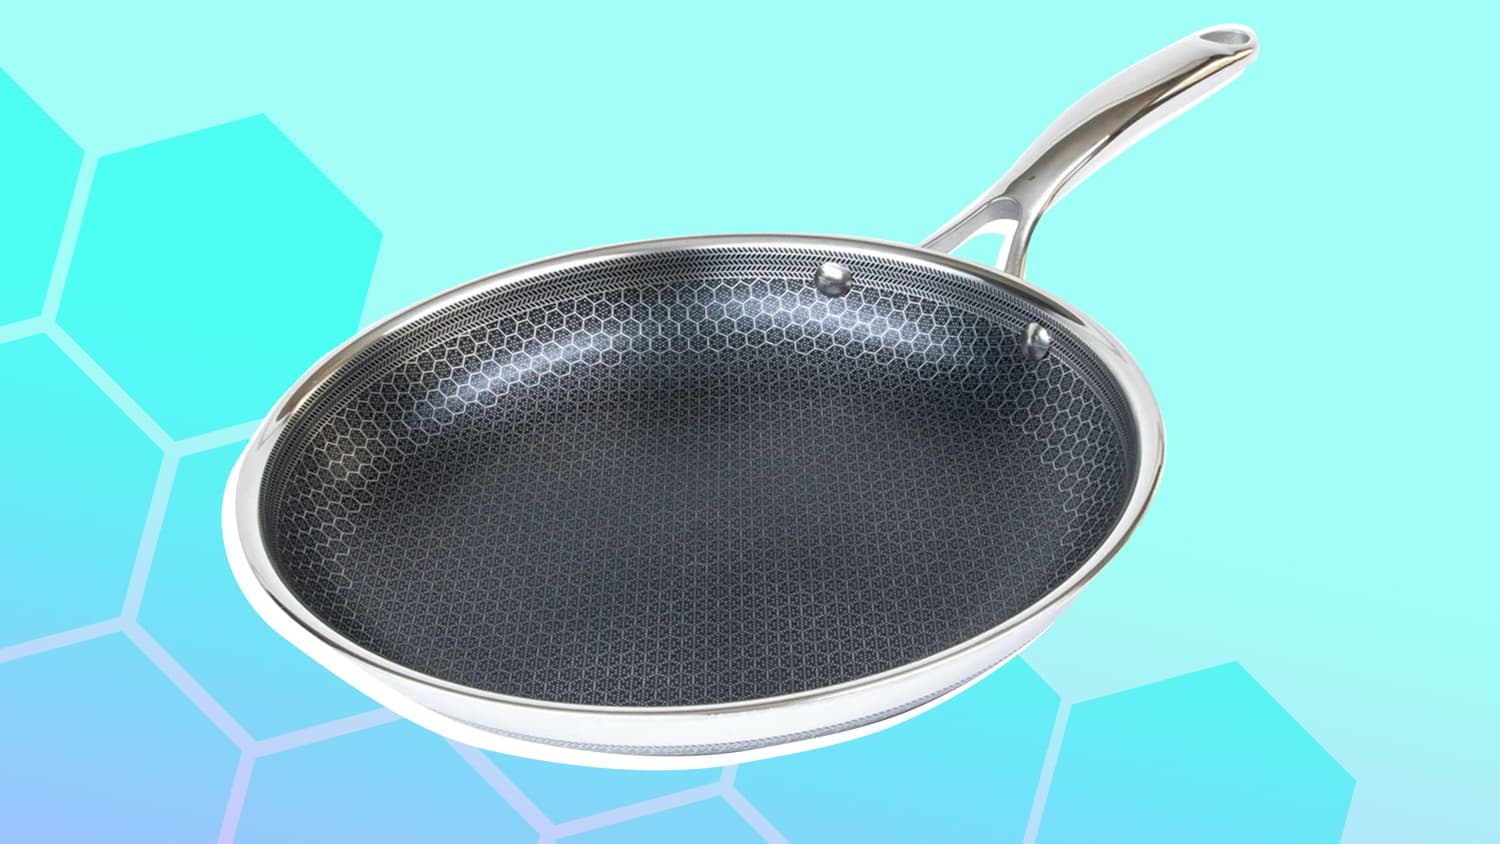 HexClad Skillets Review